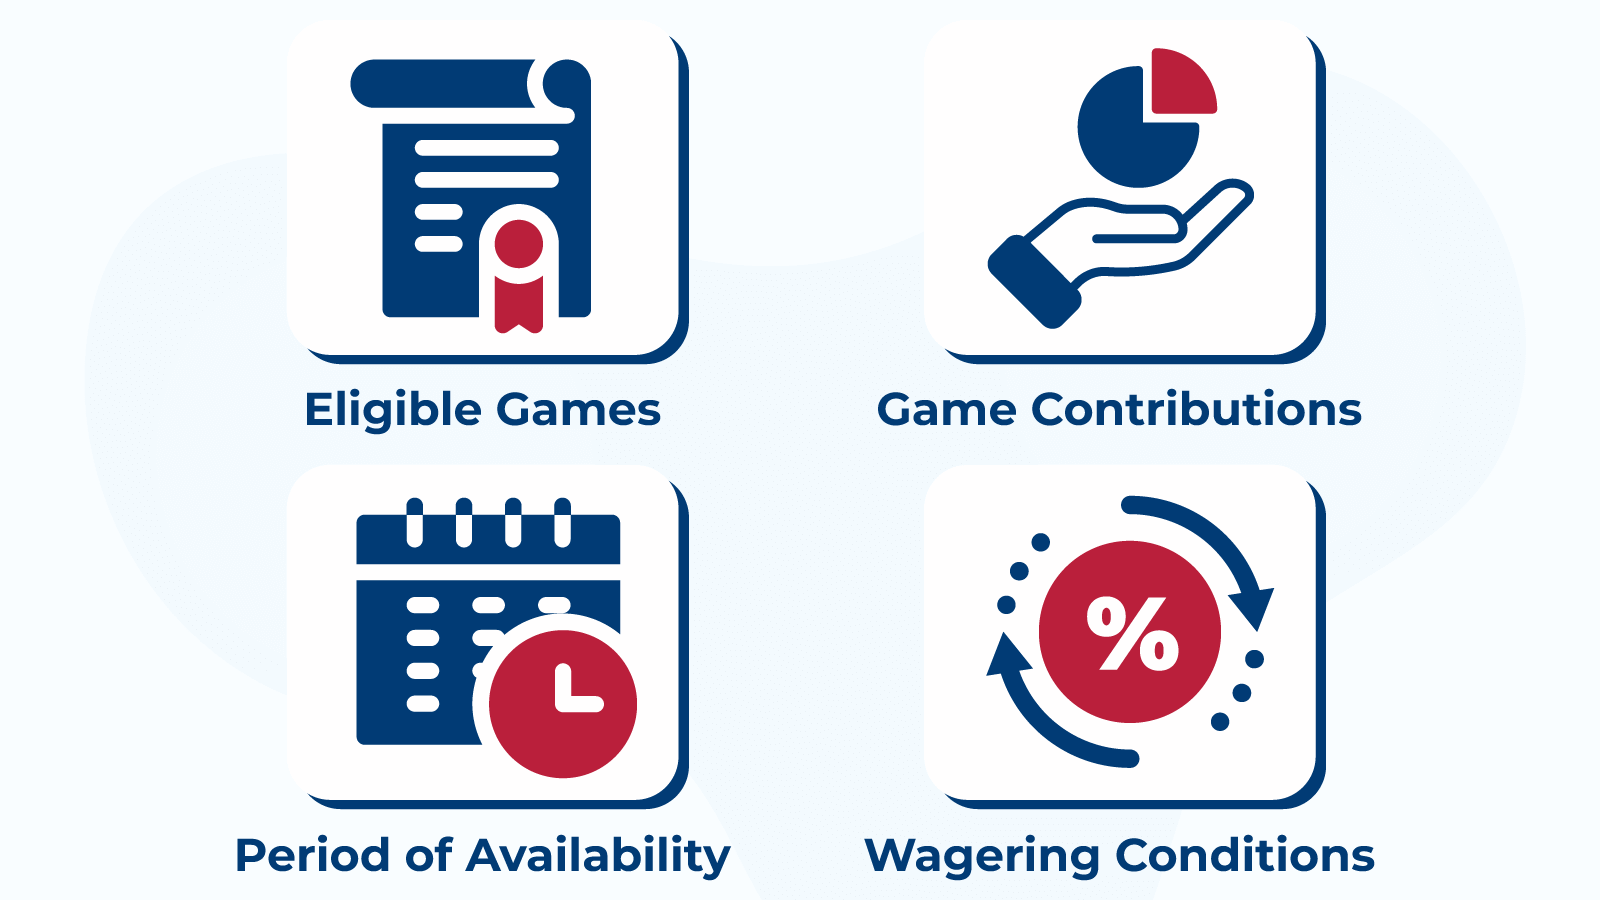 Eligible Games